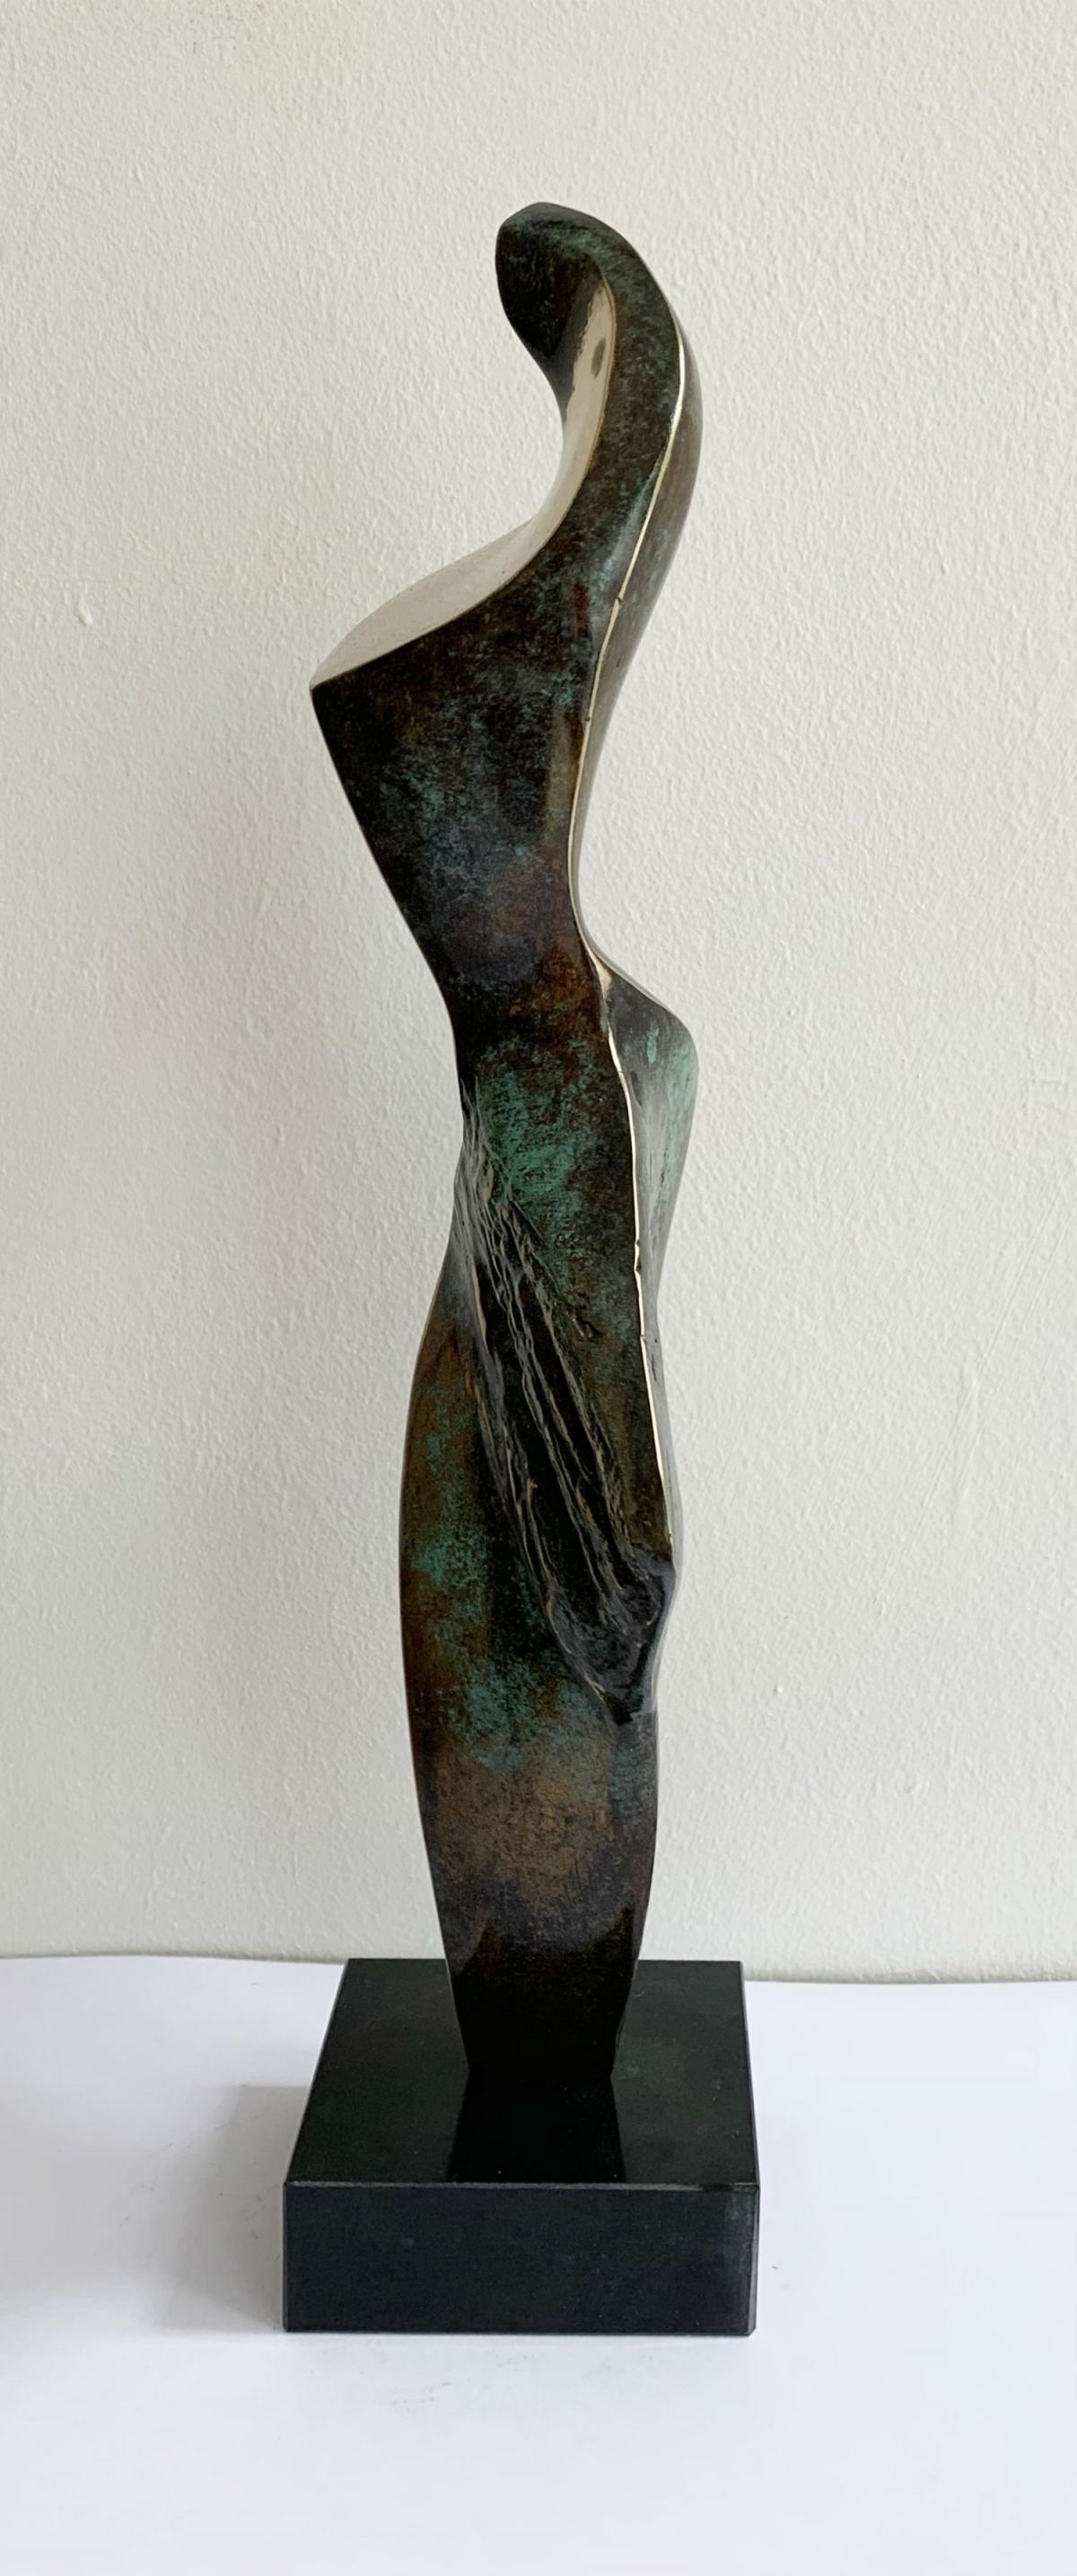 Dame VII - XXI century Contemporary bronze sculpture, Abstract & figurative - Gold Abstract Sculpture by Stanisław Wysocki